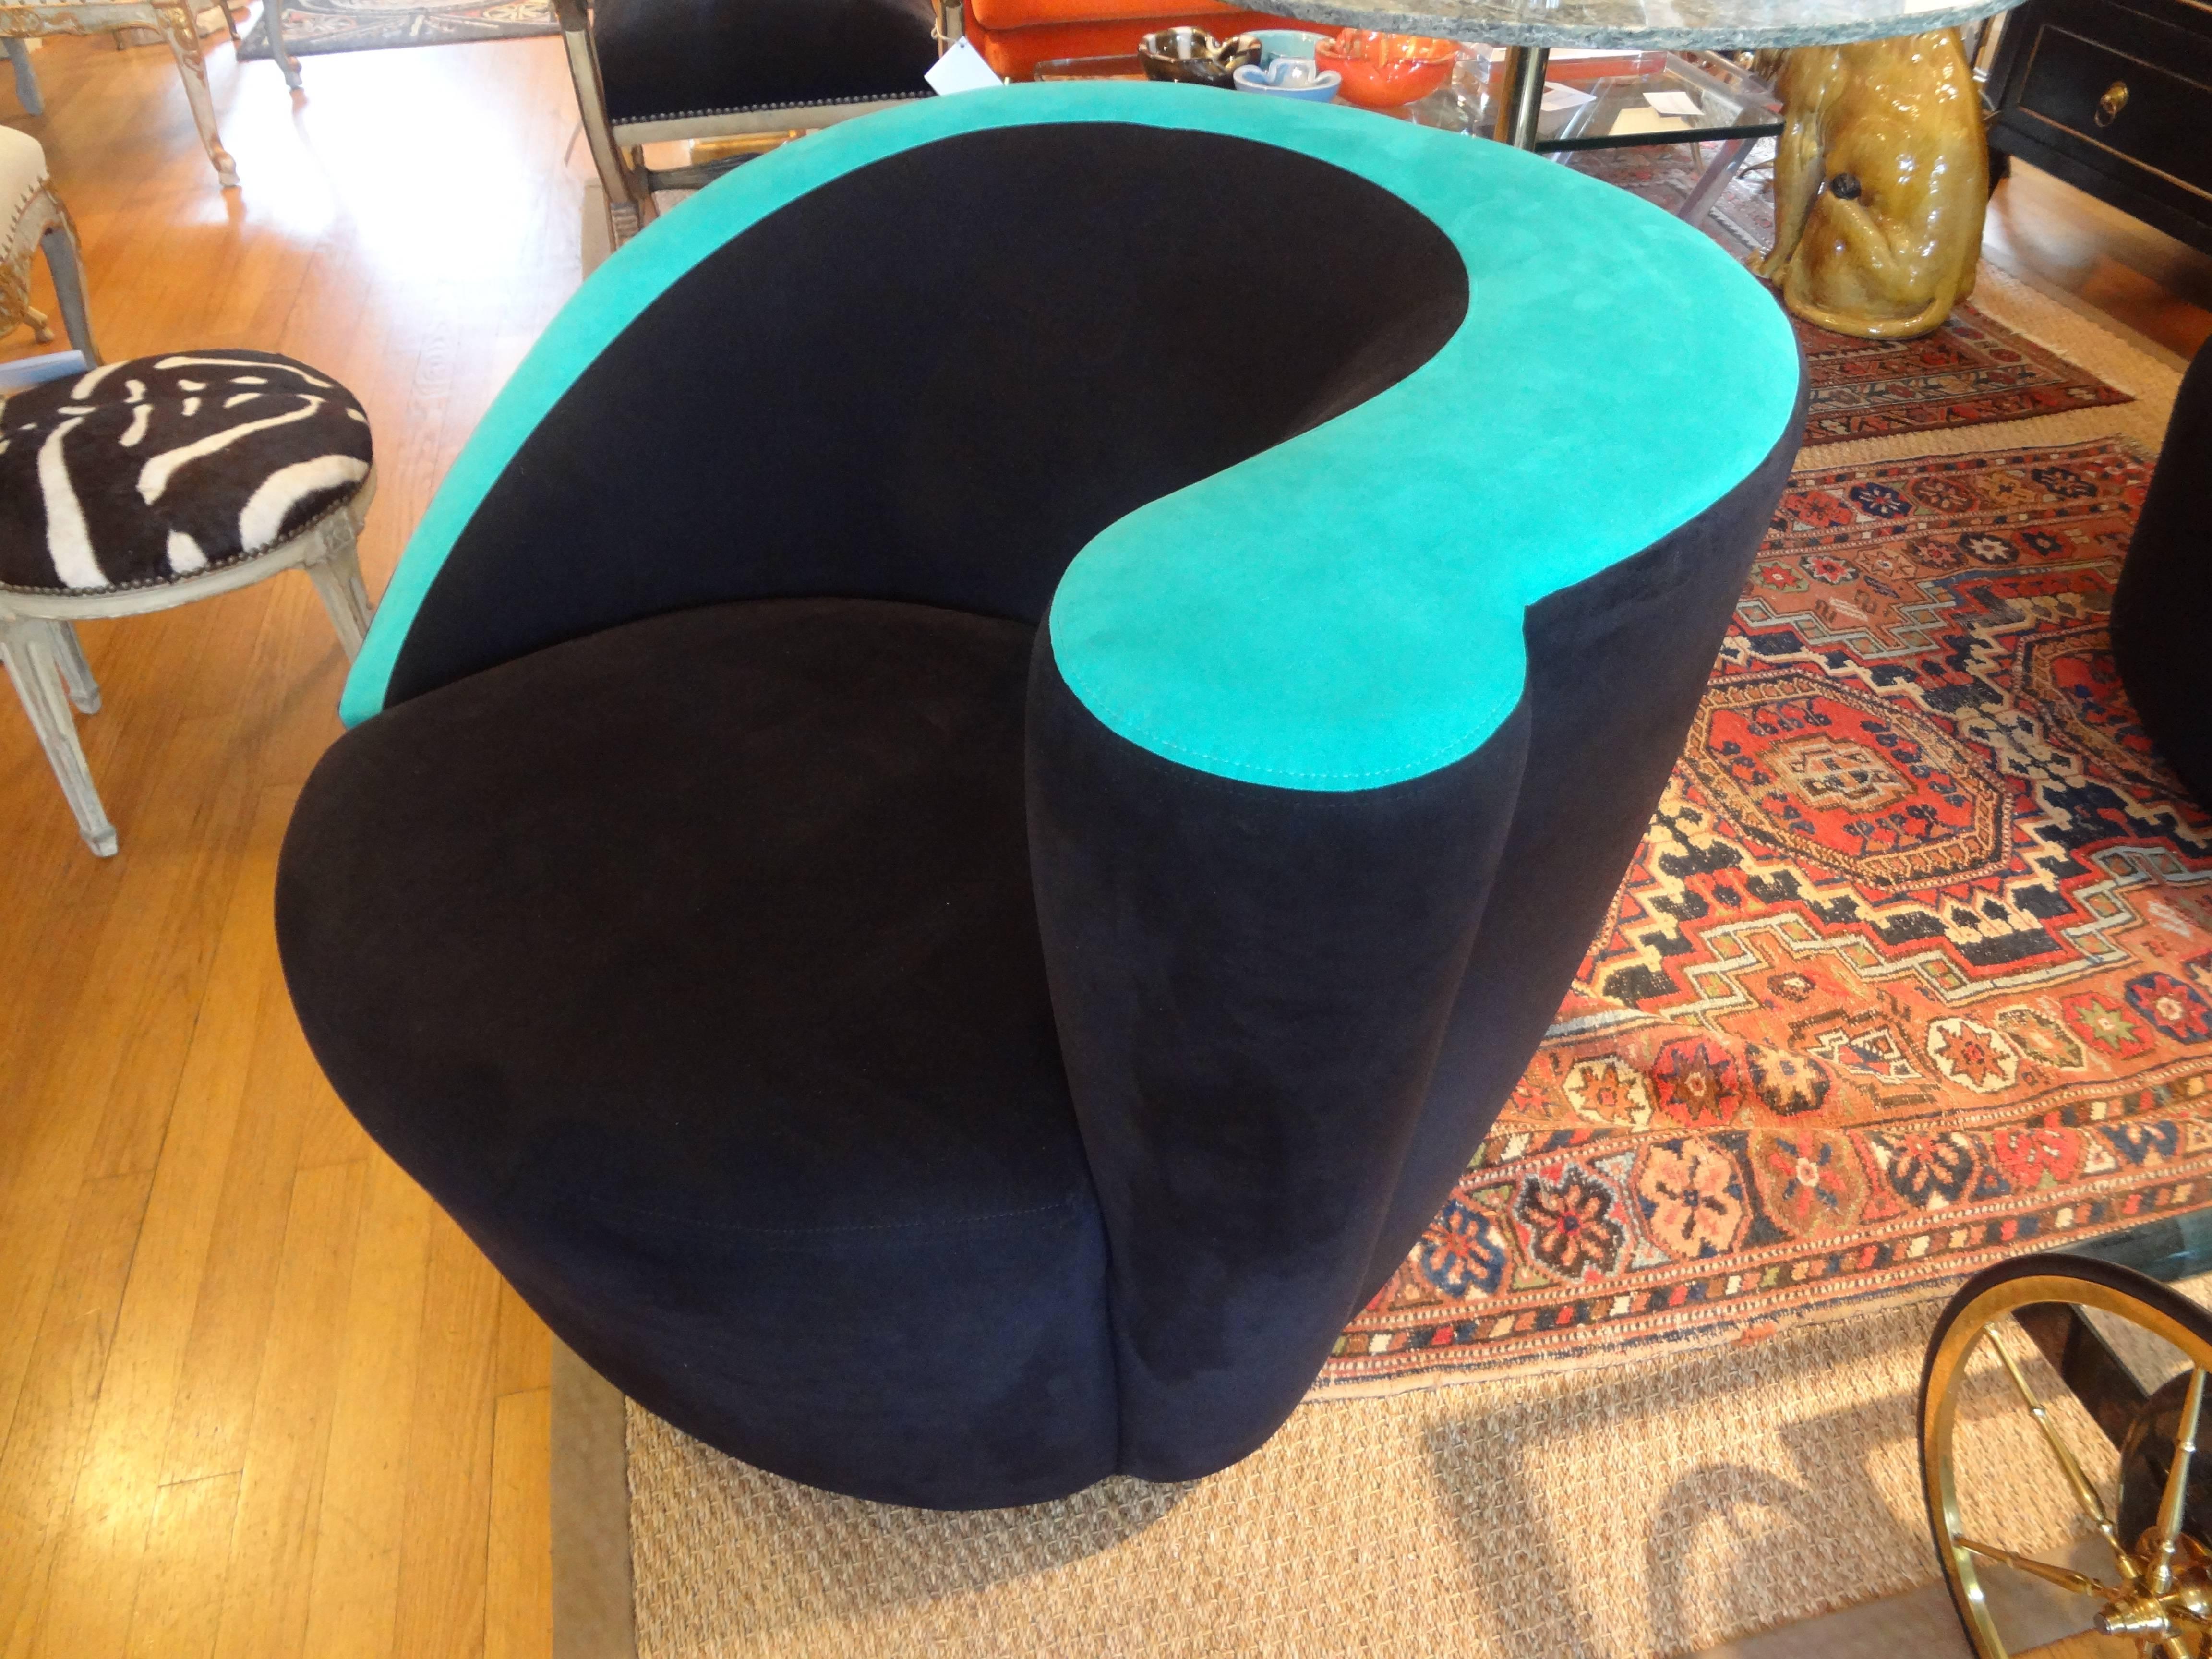 Classic Opposing Pair of Nautilus Swivel Chairs By Vladimir Kagan For Directional Upholstered In Black And Turquoise Ultrasuede Fabric.  Fabric In Very Good Condition And Has Been Professionally Cleaned. These Club Chairs Are Gorgeous And